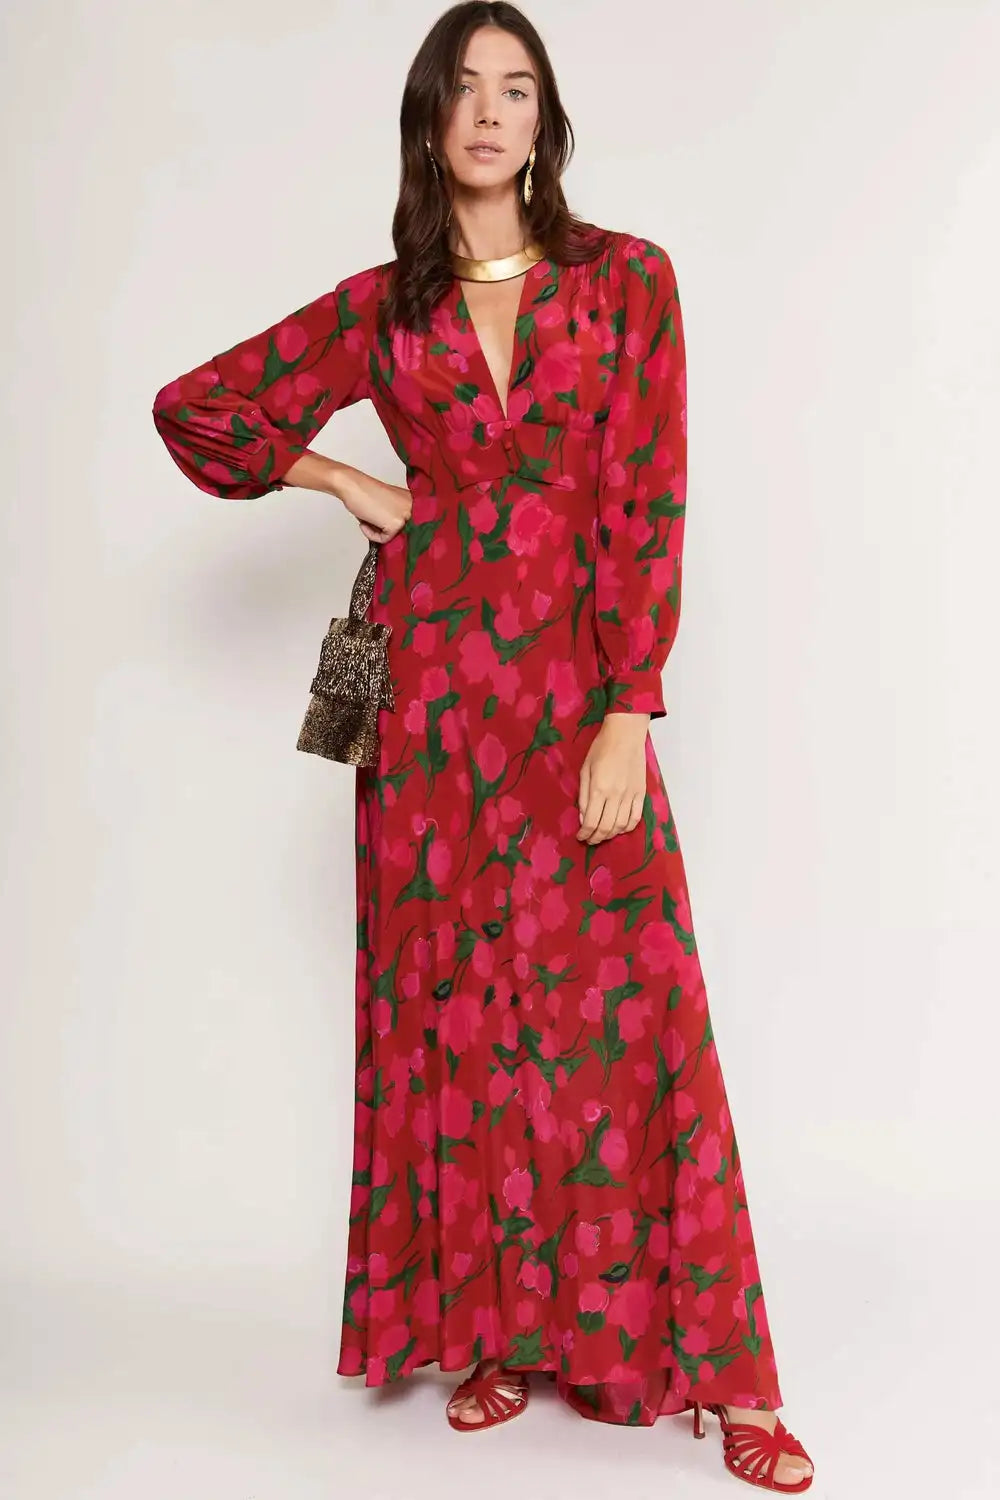 Elevate your style with the Dress Rose, a gorgeous handmade masterpiece by a high-end designer. Perfect for shopping and banquets, this dress features a stunning red print and a long, elegant silhouette. Experience luxury and sophistication with every wear.